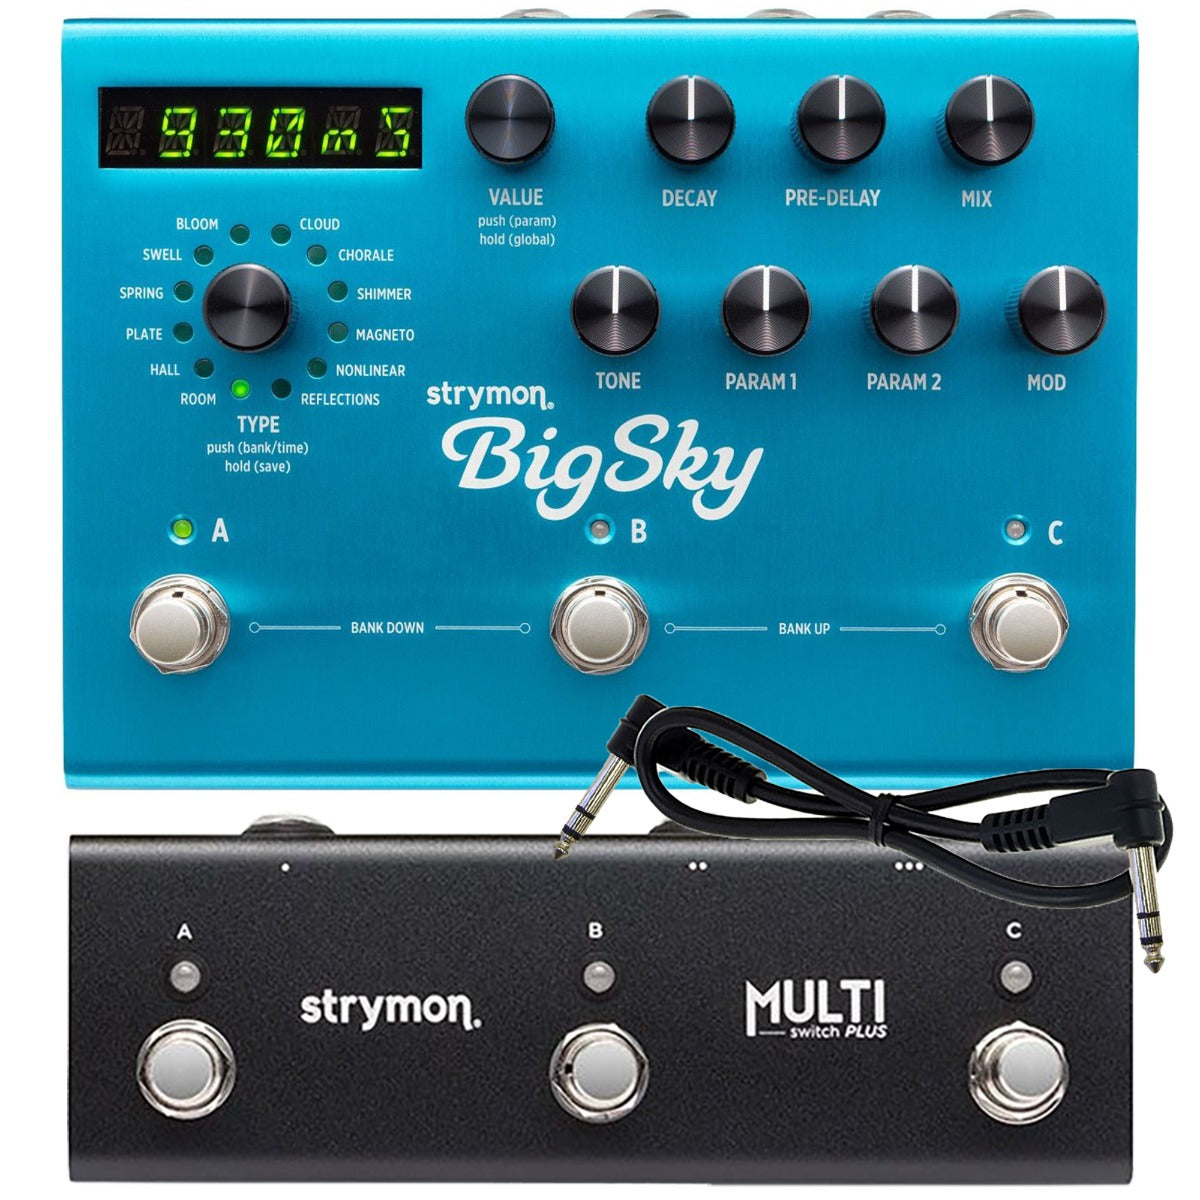 Collage of the components in the Strymon BigSky Multidimensional Reverberator Reverb Pedal with Multiswitch Plus BUNDLE